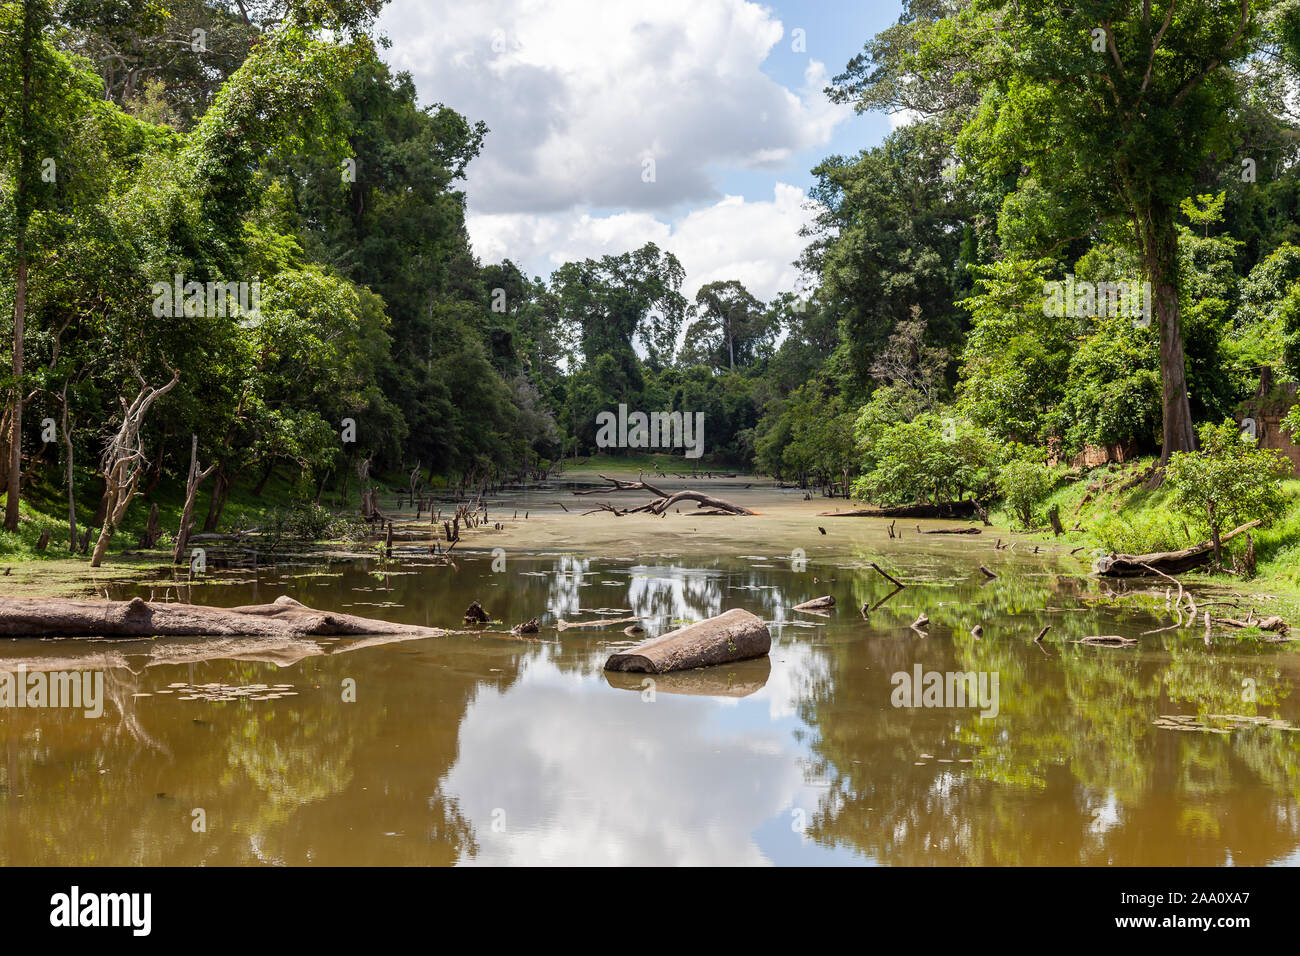 Logs lying in flooded swamps. NIce green colors along the river banks. The blue sky is reflecting in the surface. Some algae is already visible. Stock Photo